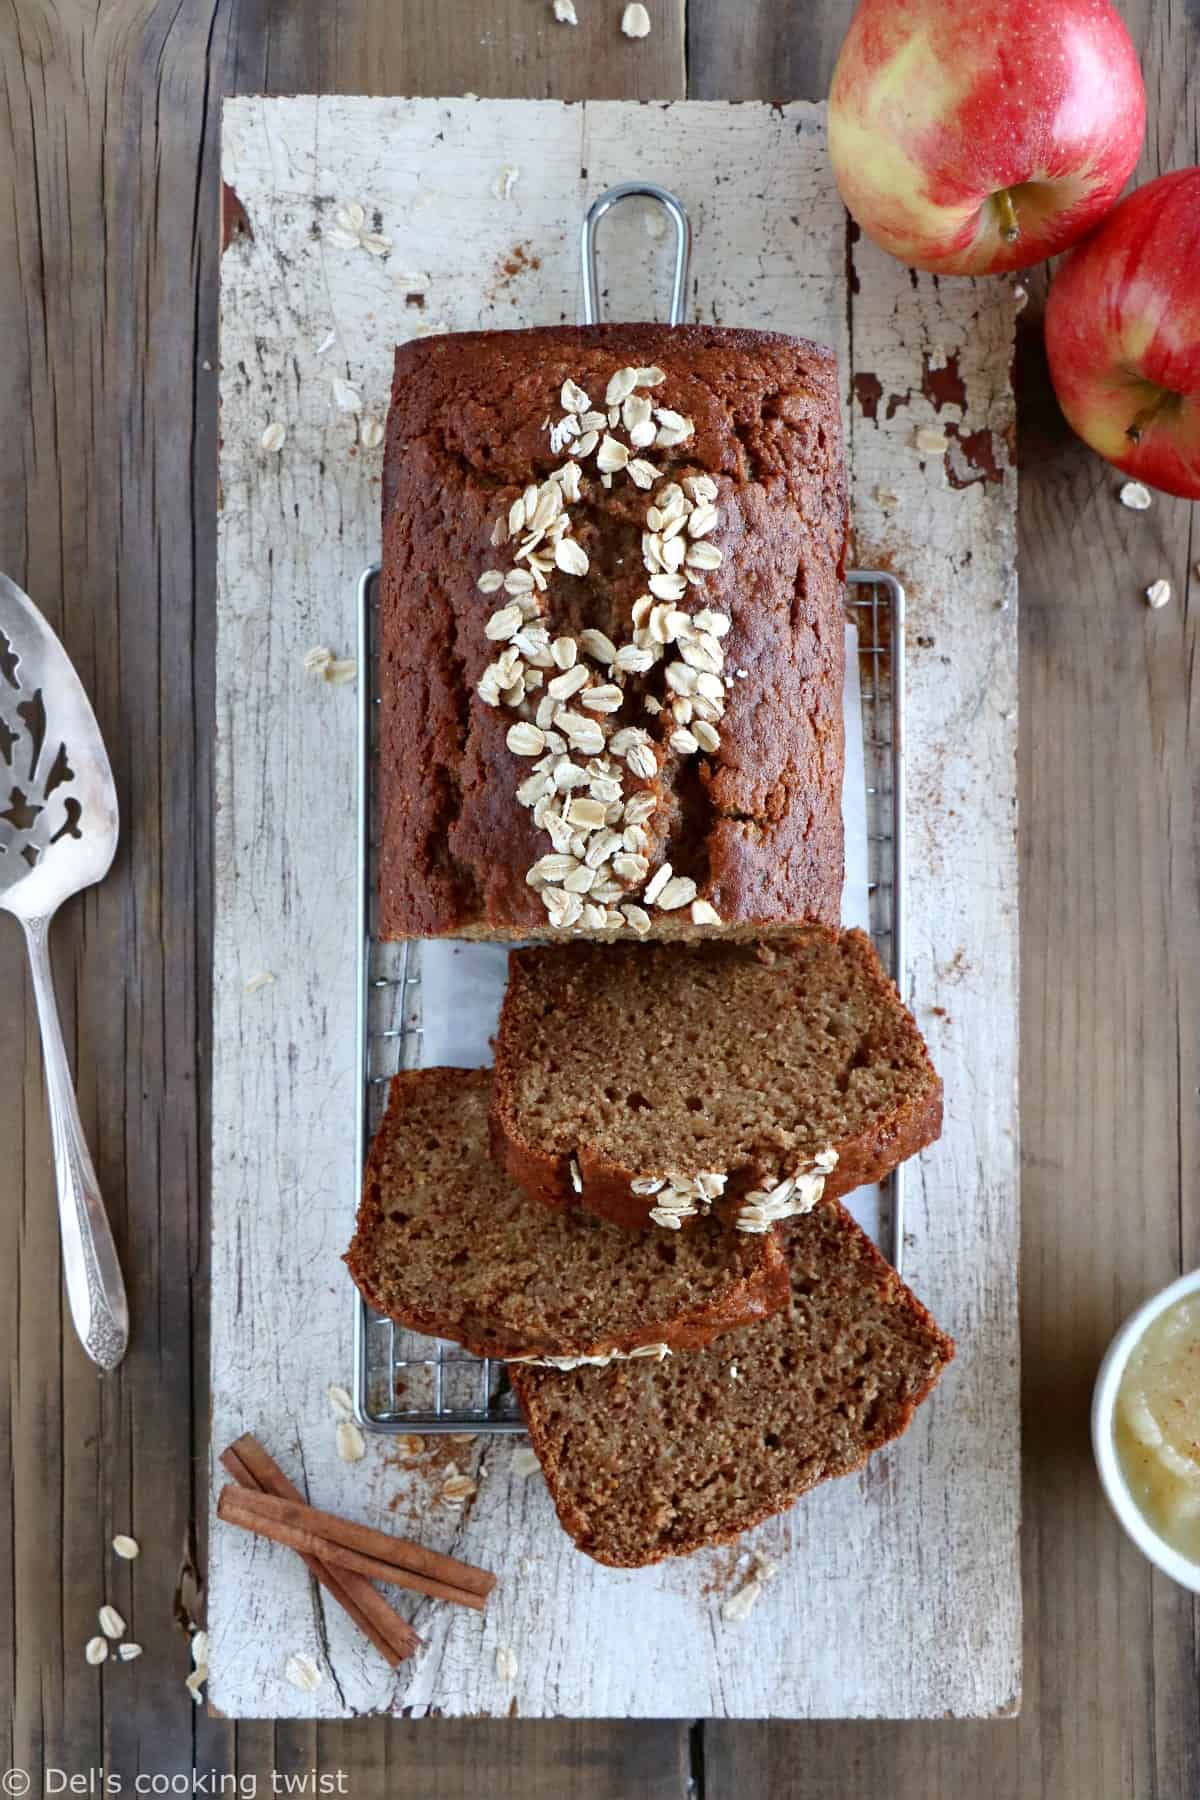 Healthy whole wheat apple bread is a low fat recipe prepared with whole wheat flour, shredded apples and is lightly sweetened with applesauce. This simple apple bread recipe is a winner.